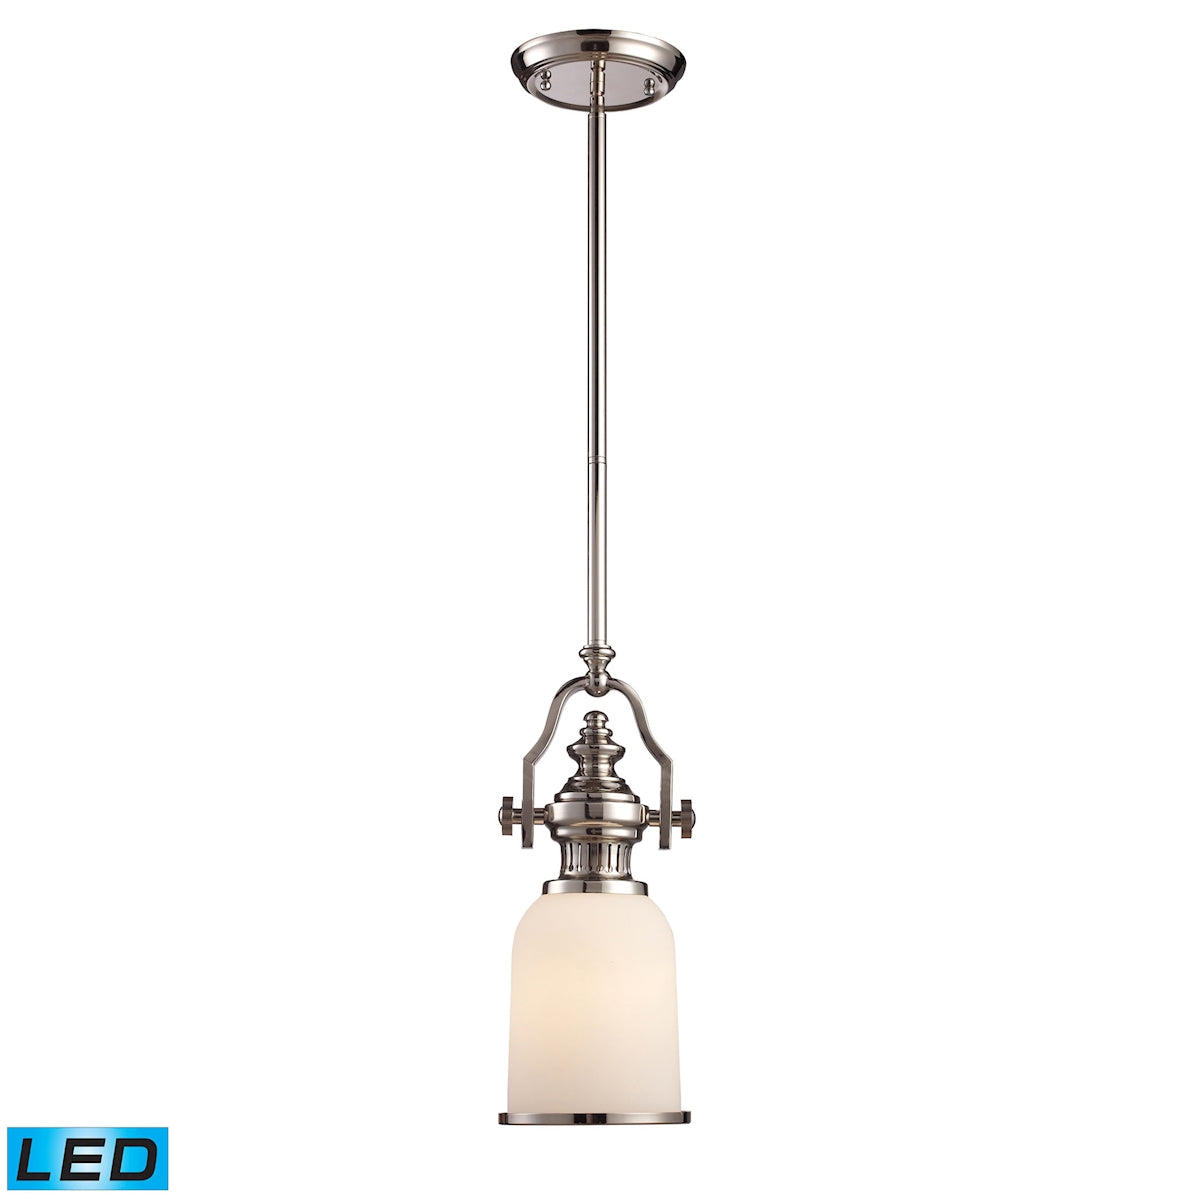 ELK Lighting 66112-1-LED Chadwick 1-Light Mini Pendant in Polished Nickel with White Glass - Includes LED Bulb